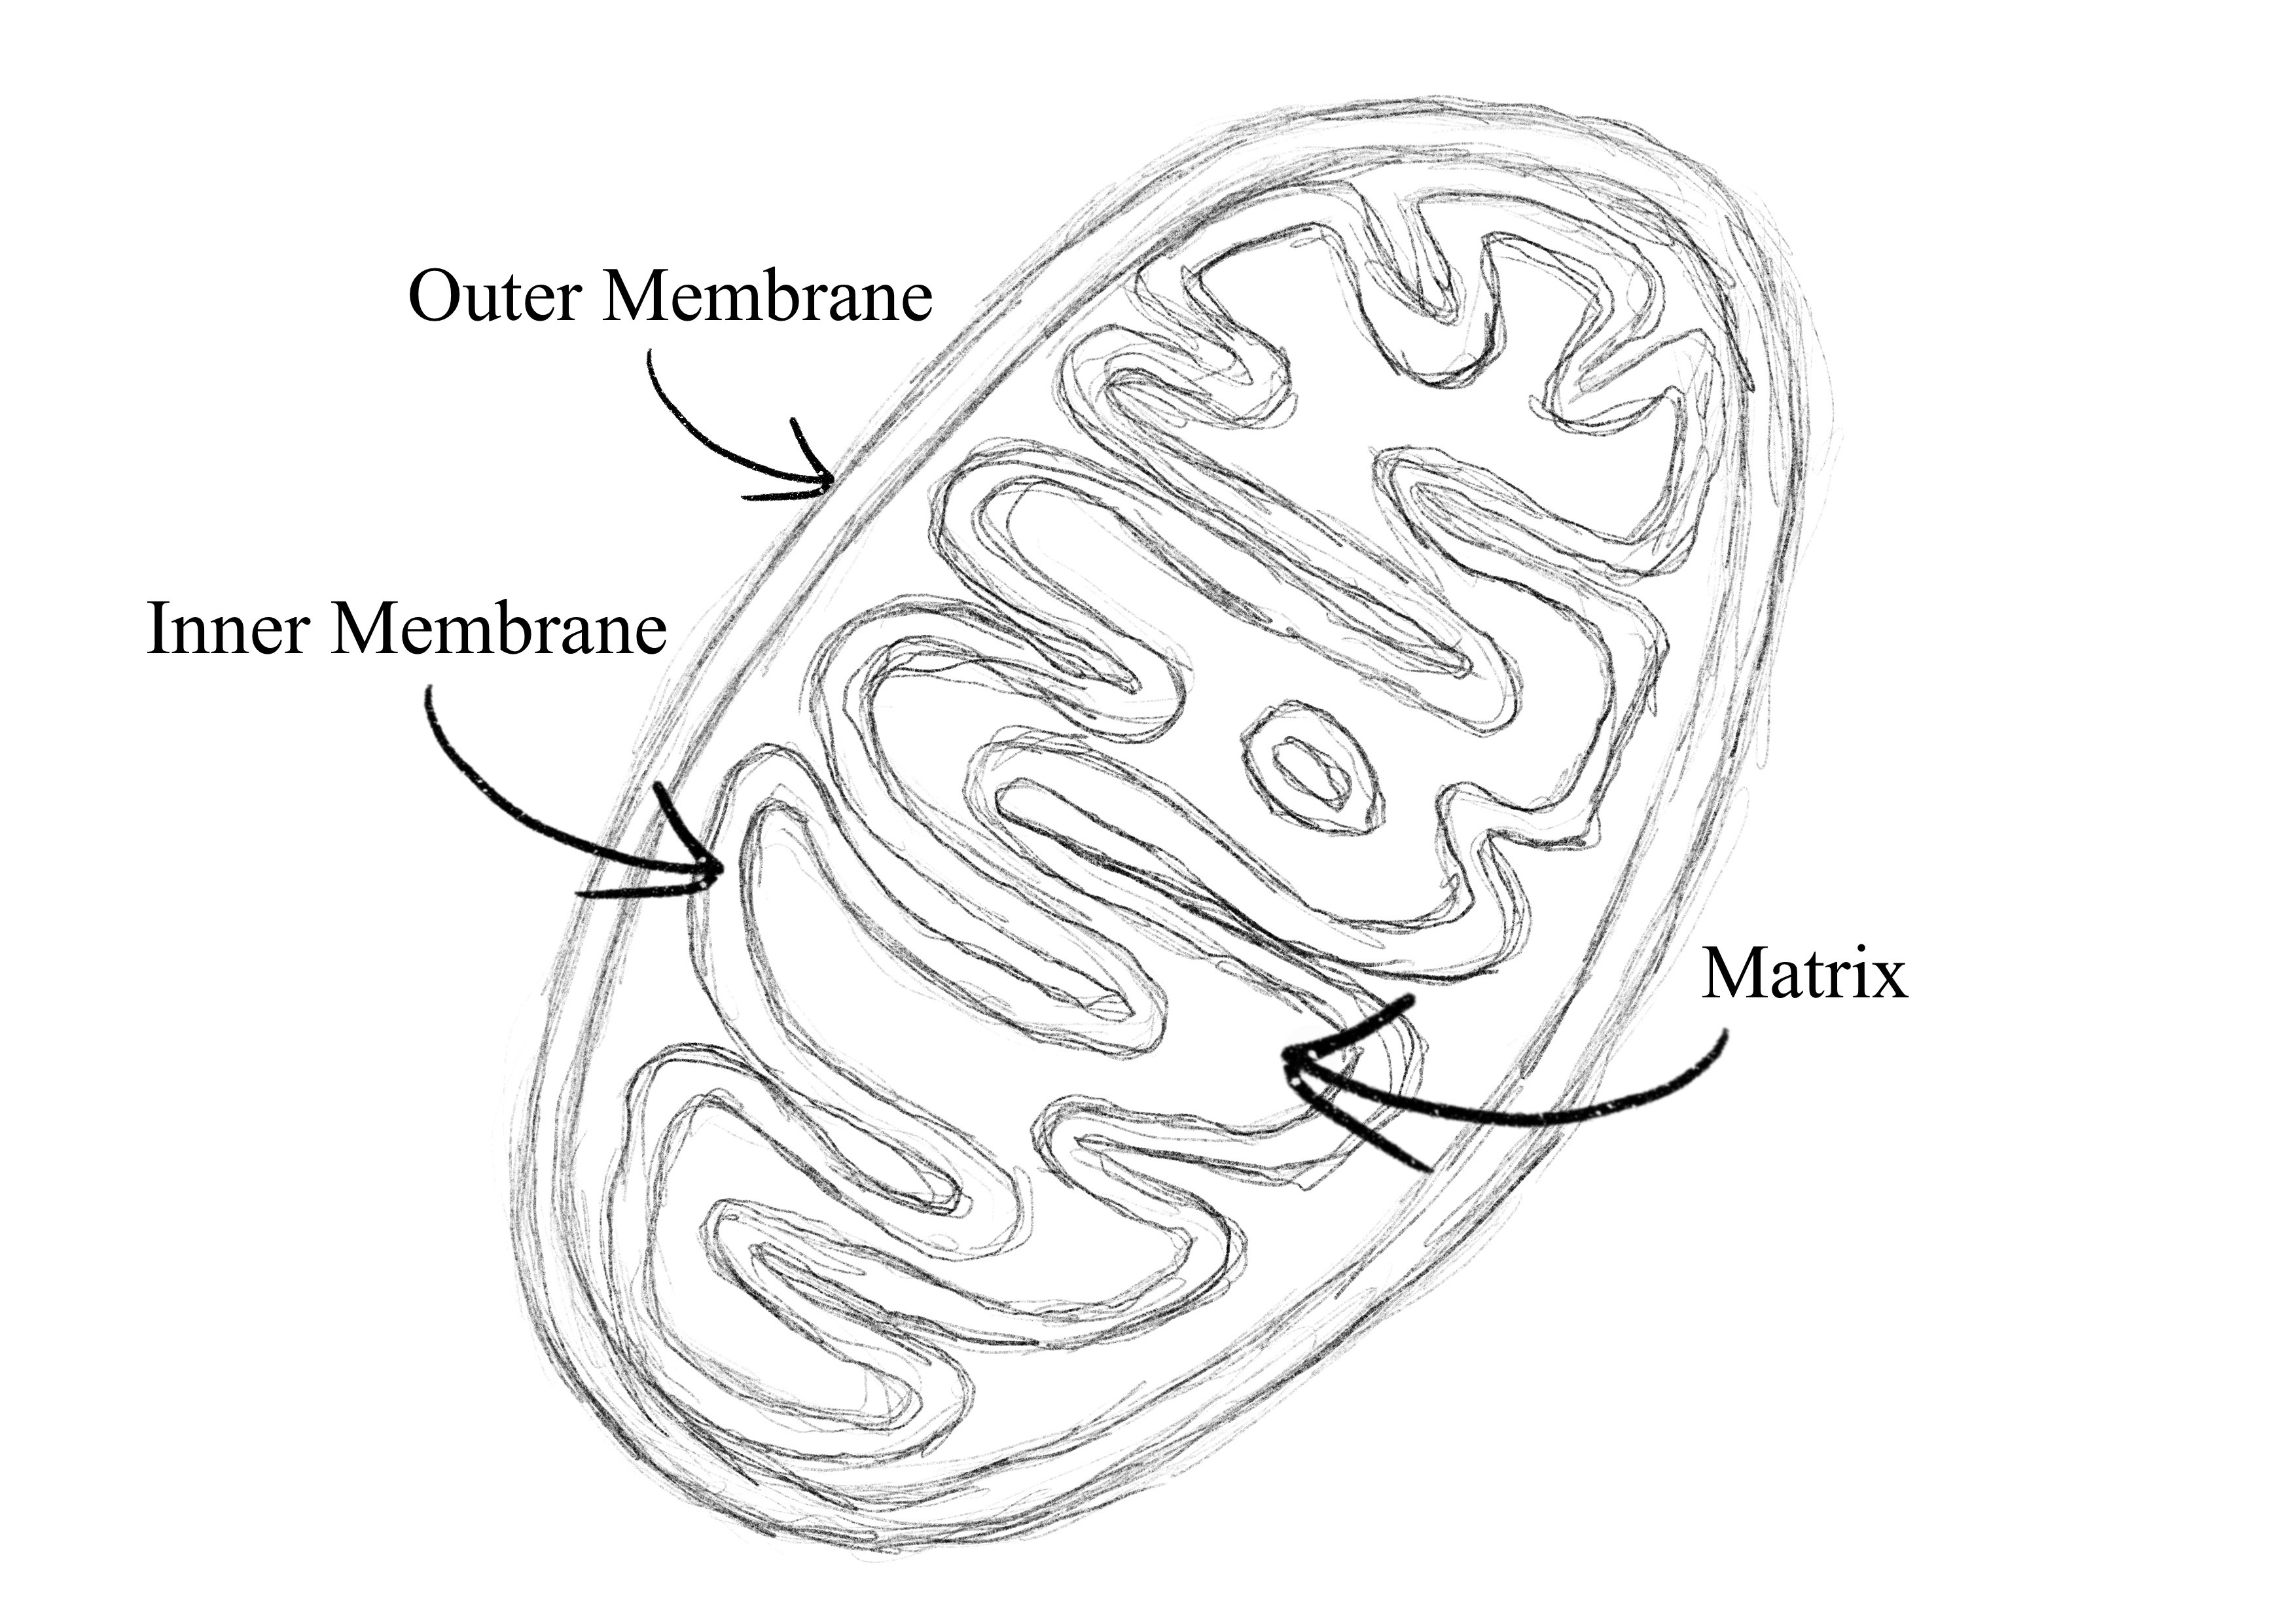 Sketch of Mitochondrion